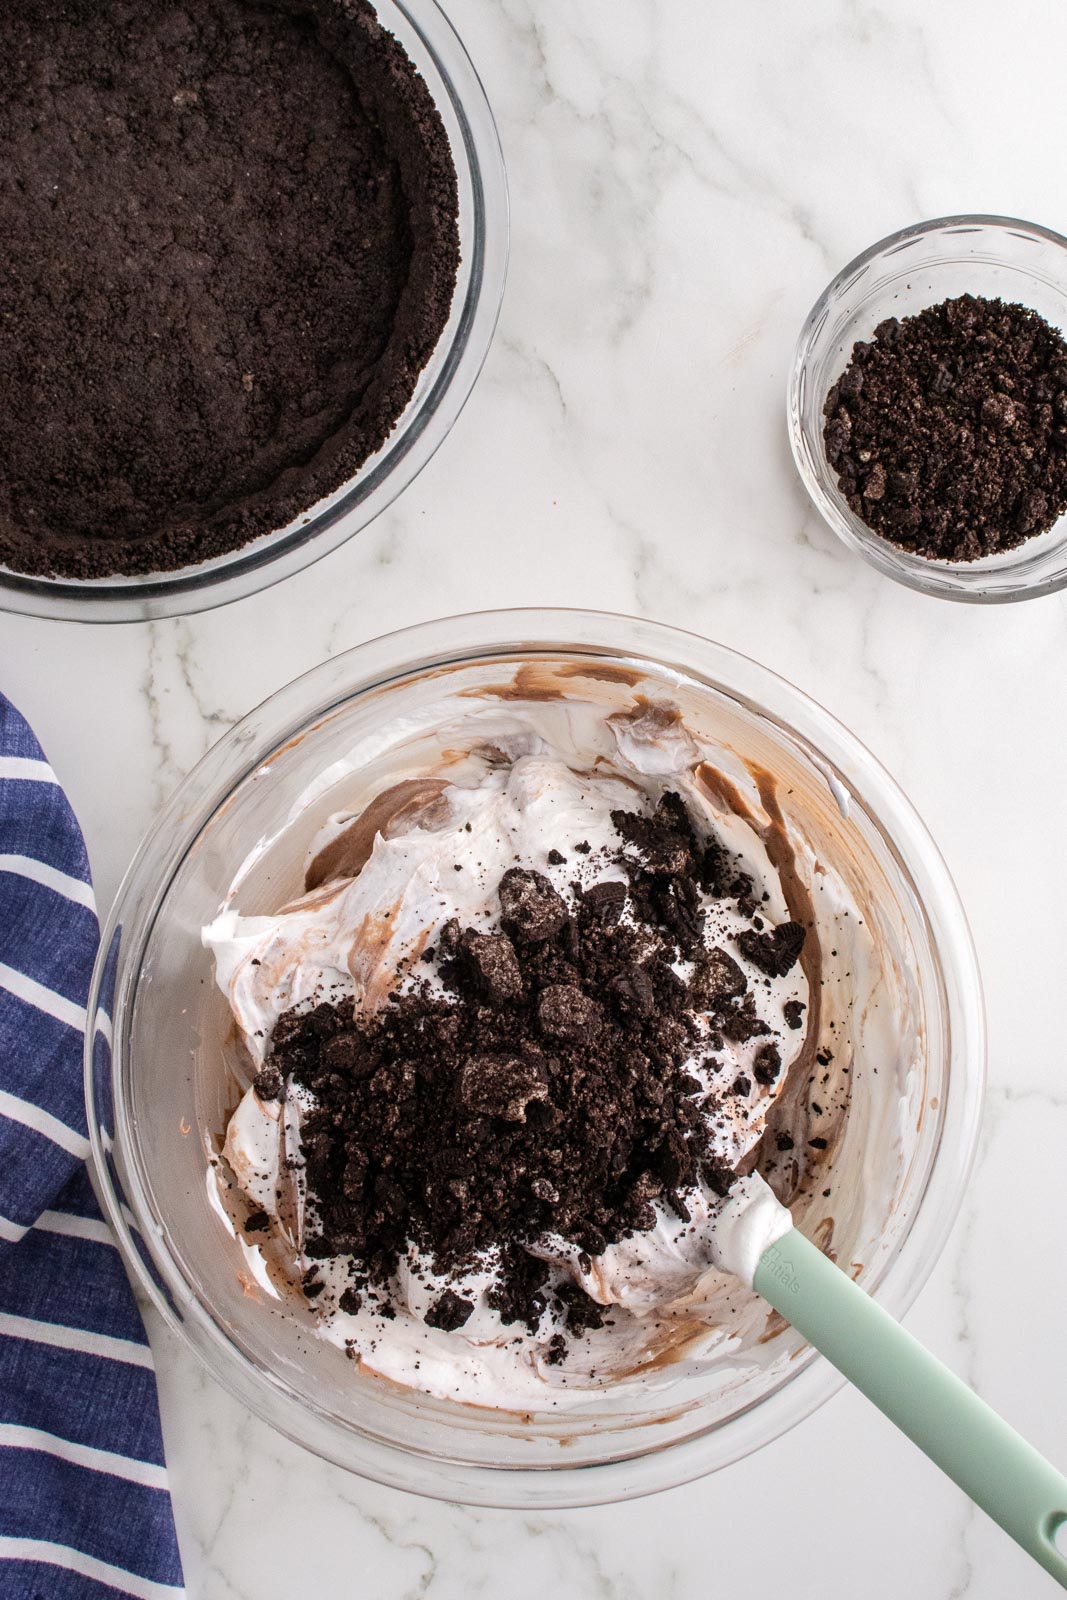 Folding Cool Whip and Oreo crumbs into dirt pie filling.